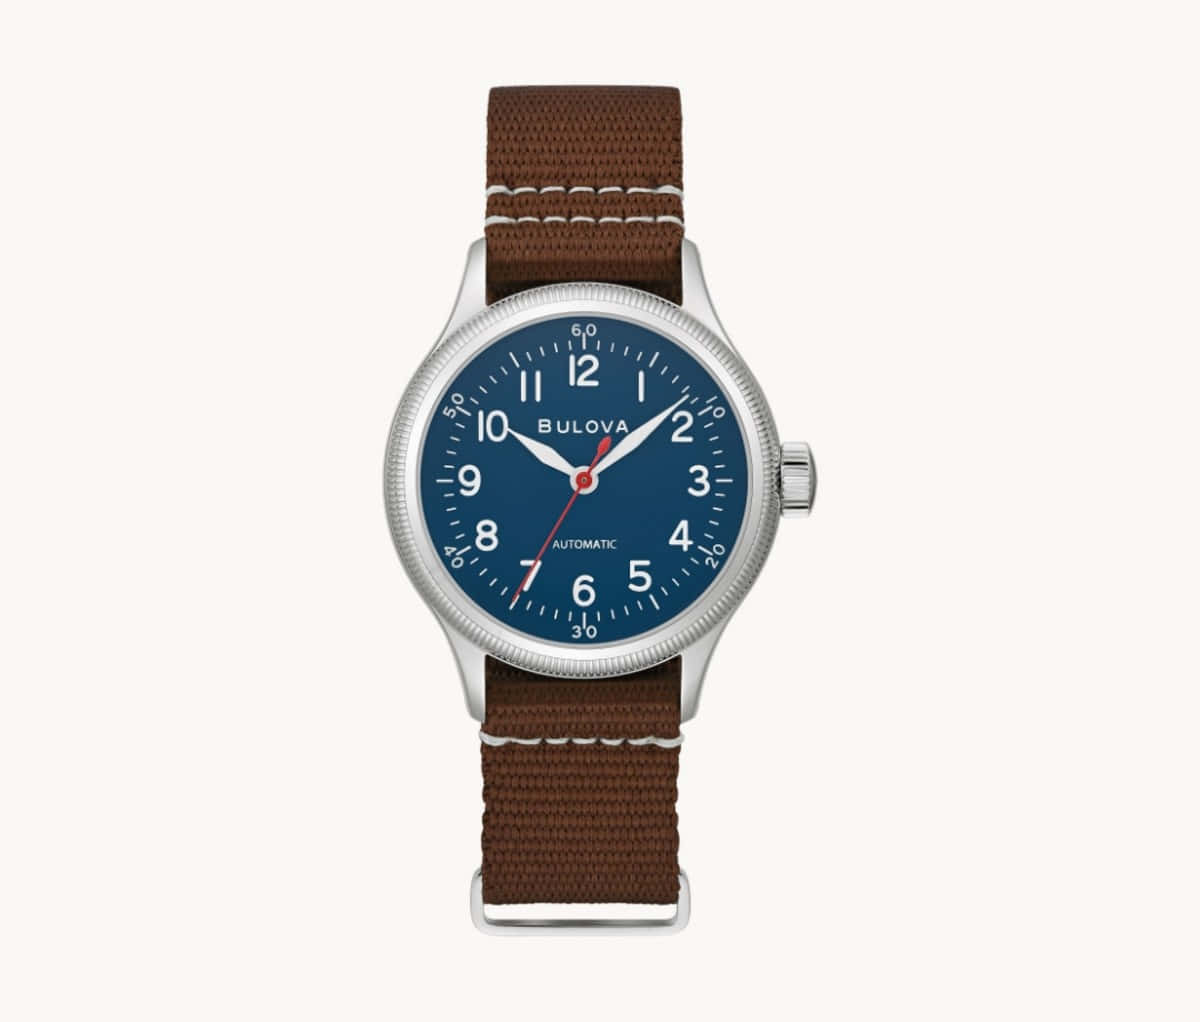 A Blue Watch With Brown Straps On A White Background